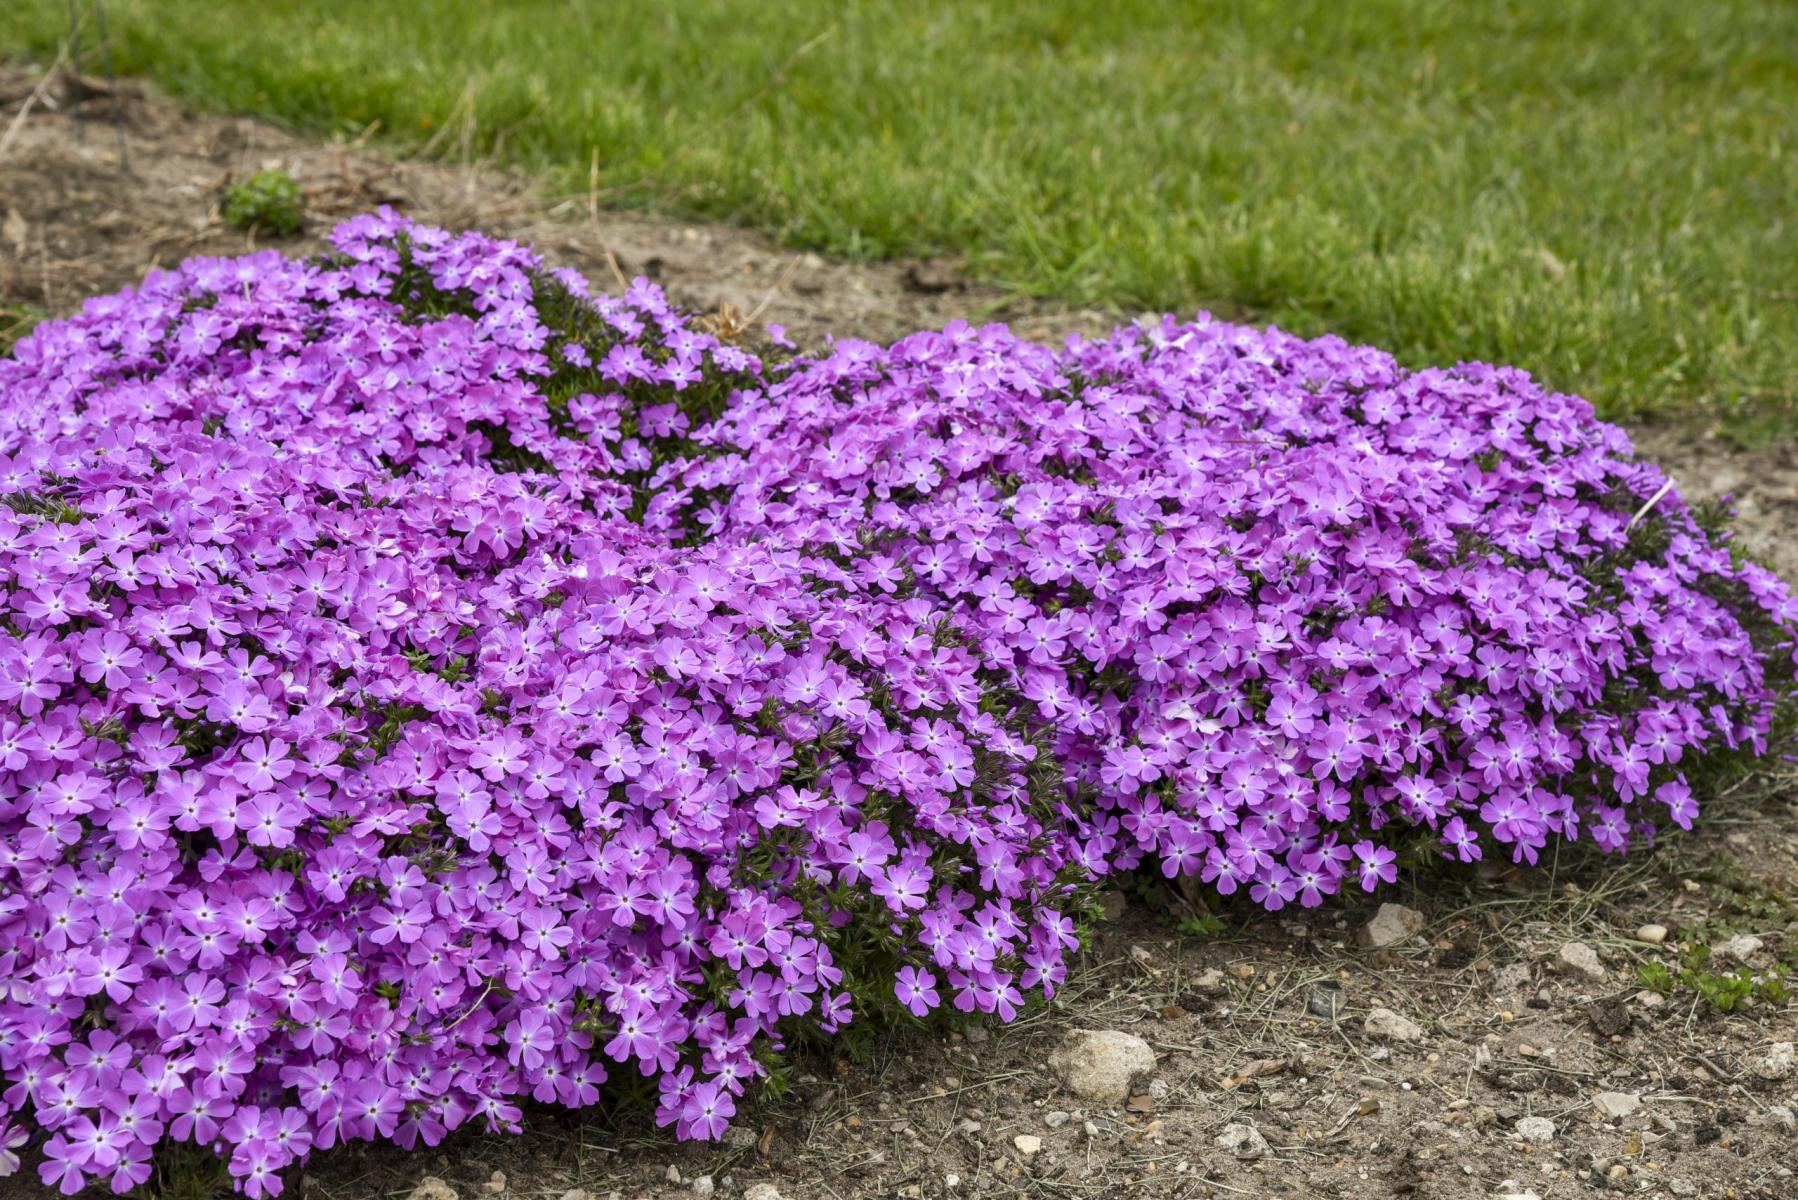 Phlox 'Spring Bling Rose Quartz' from Spring Meadow. This creeping phlox is a great spring bloomer.